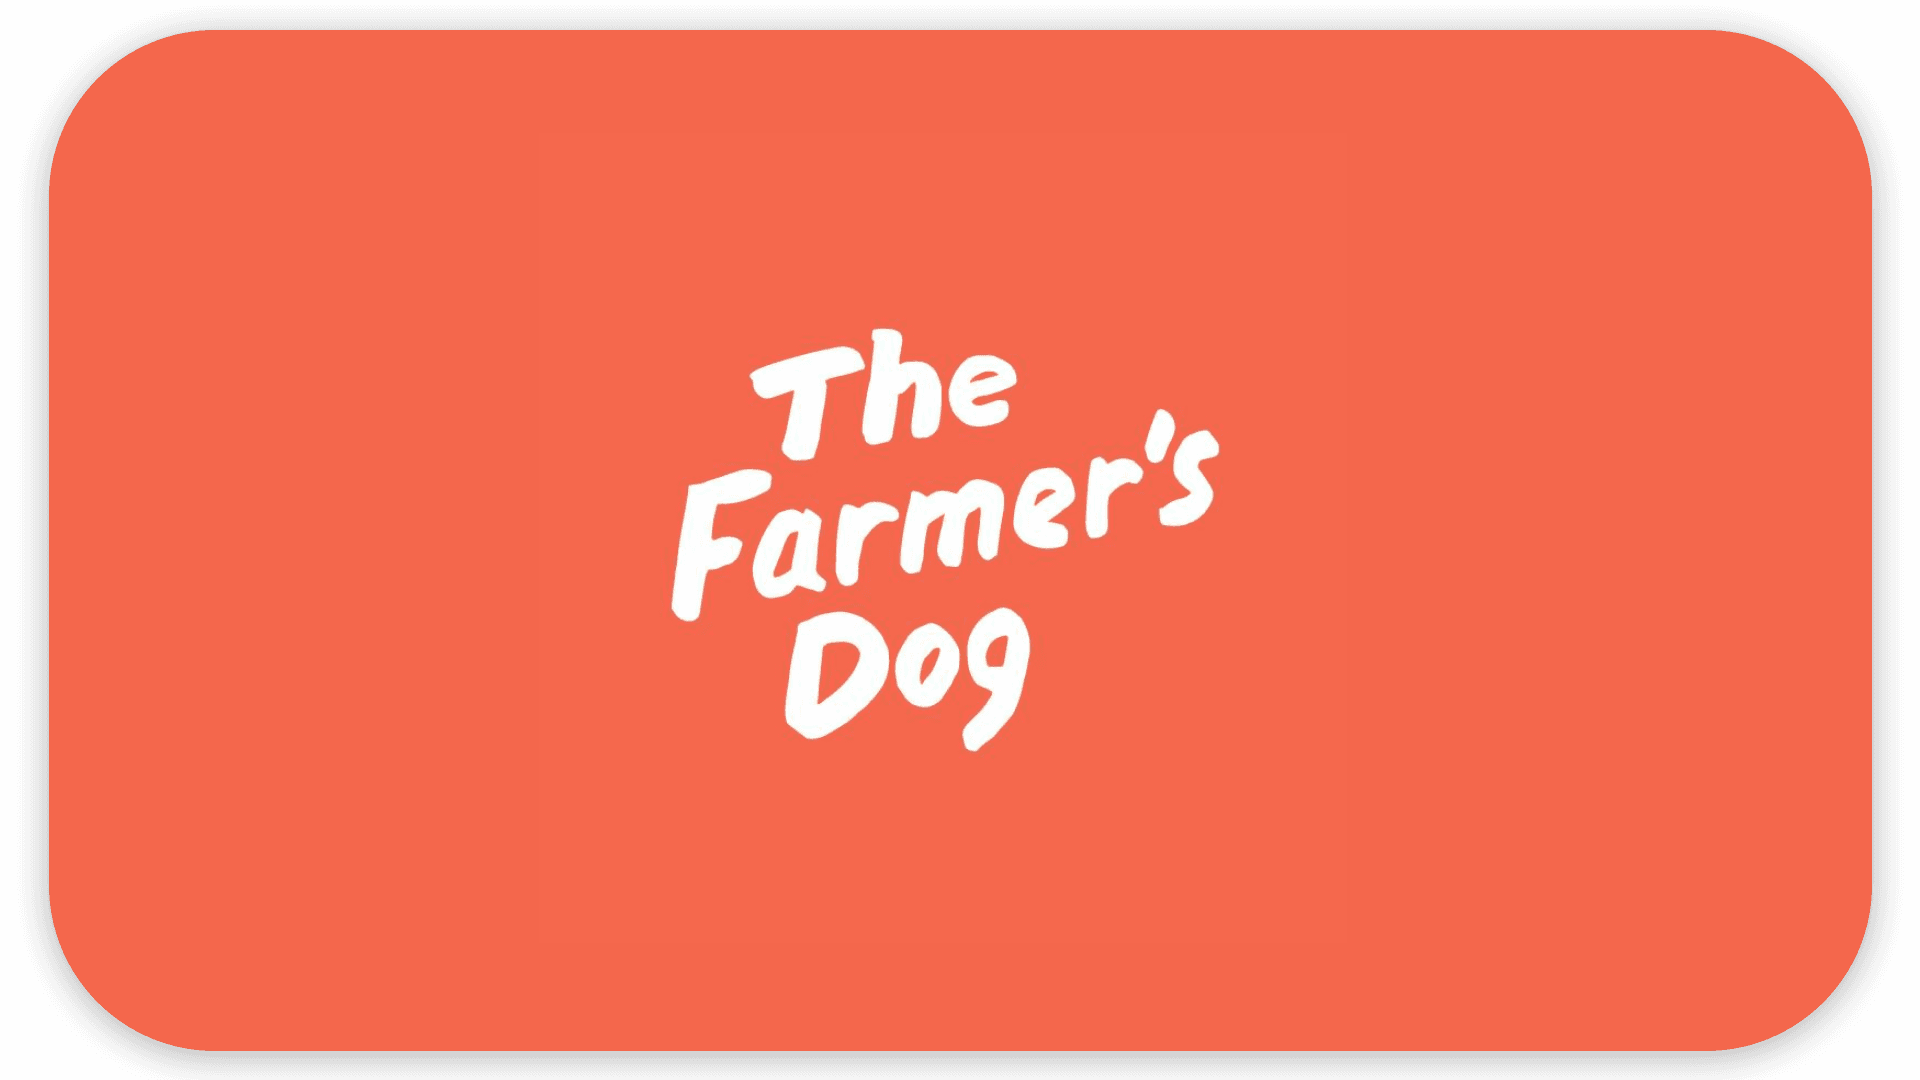 The image shows a logo with the text "The Farmer's Dog" on an orange background.